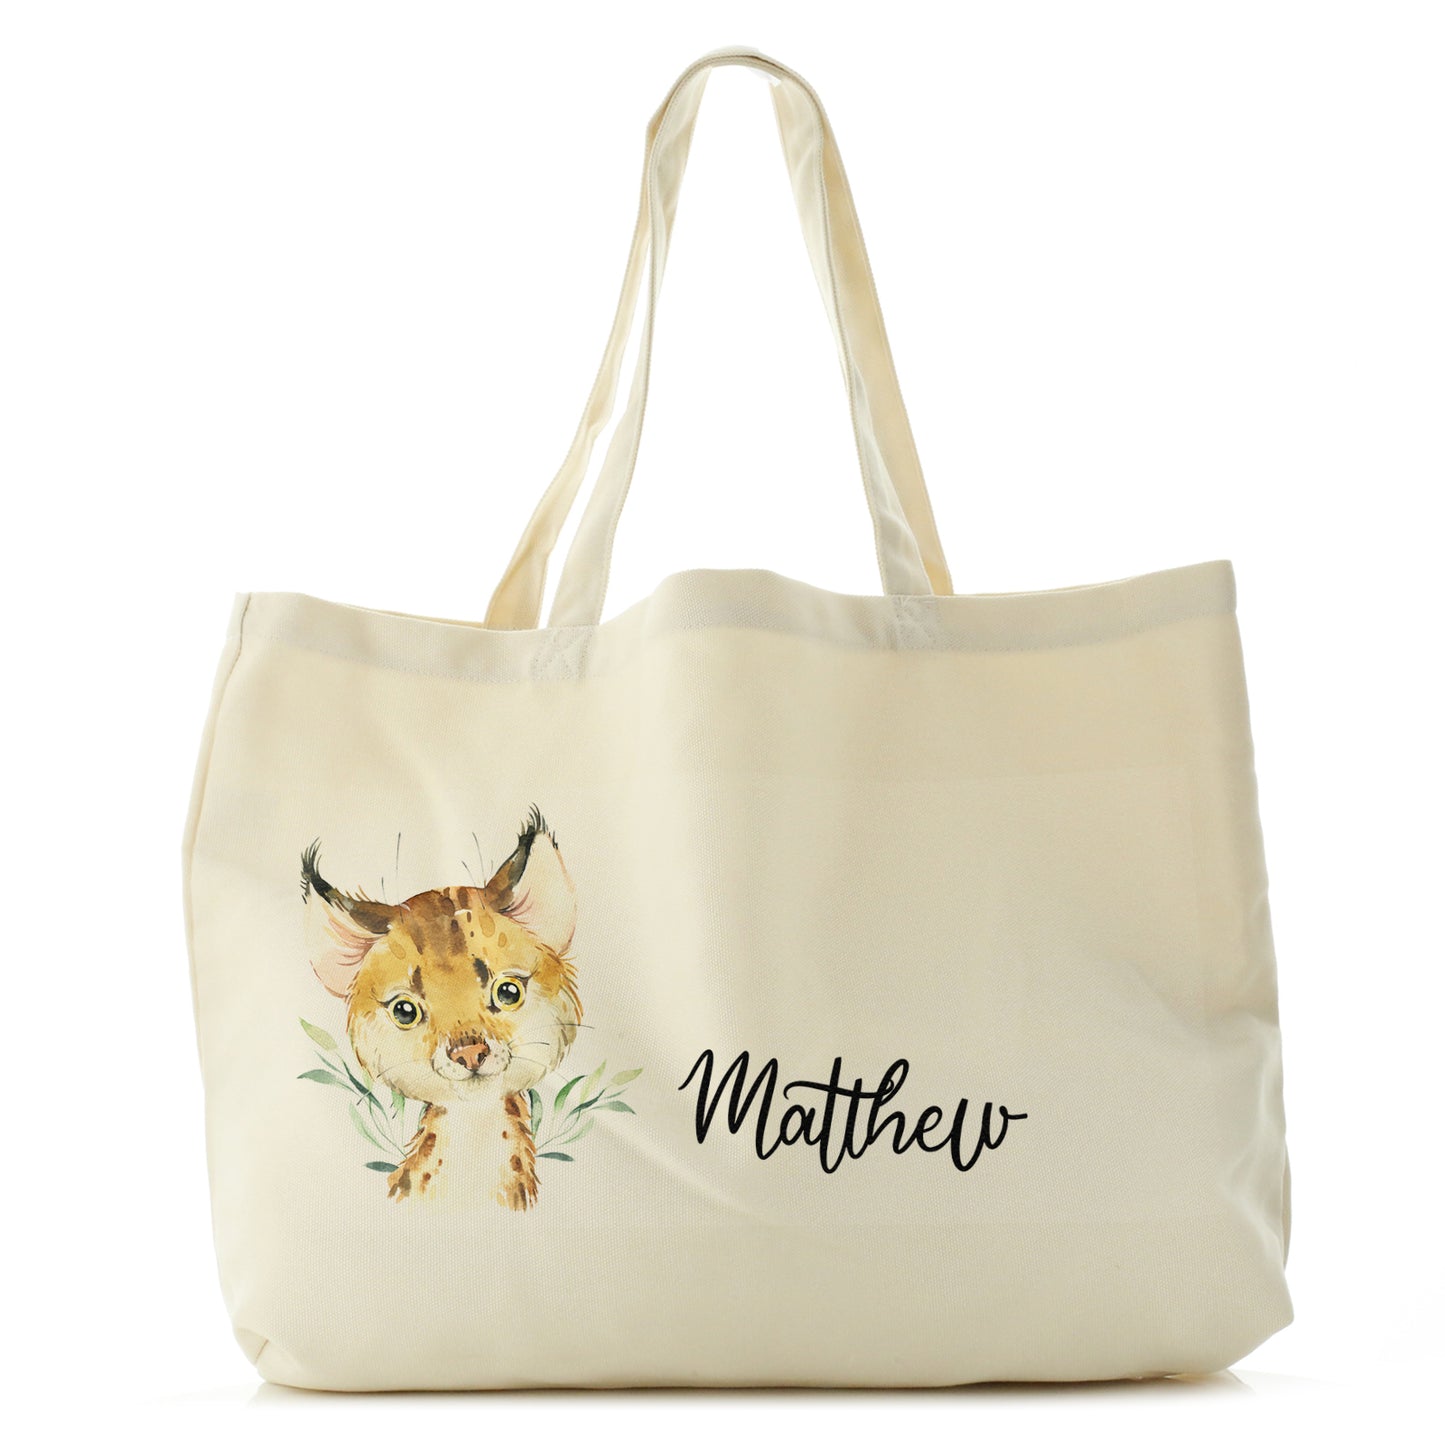 Personalised Canvas Tote Bag with Spot Cat and Leaves and Cute Text